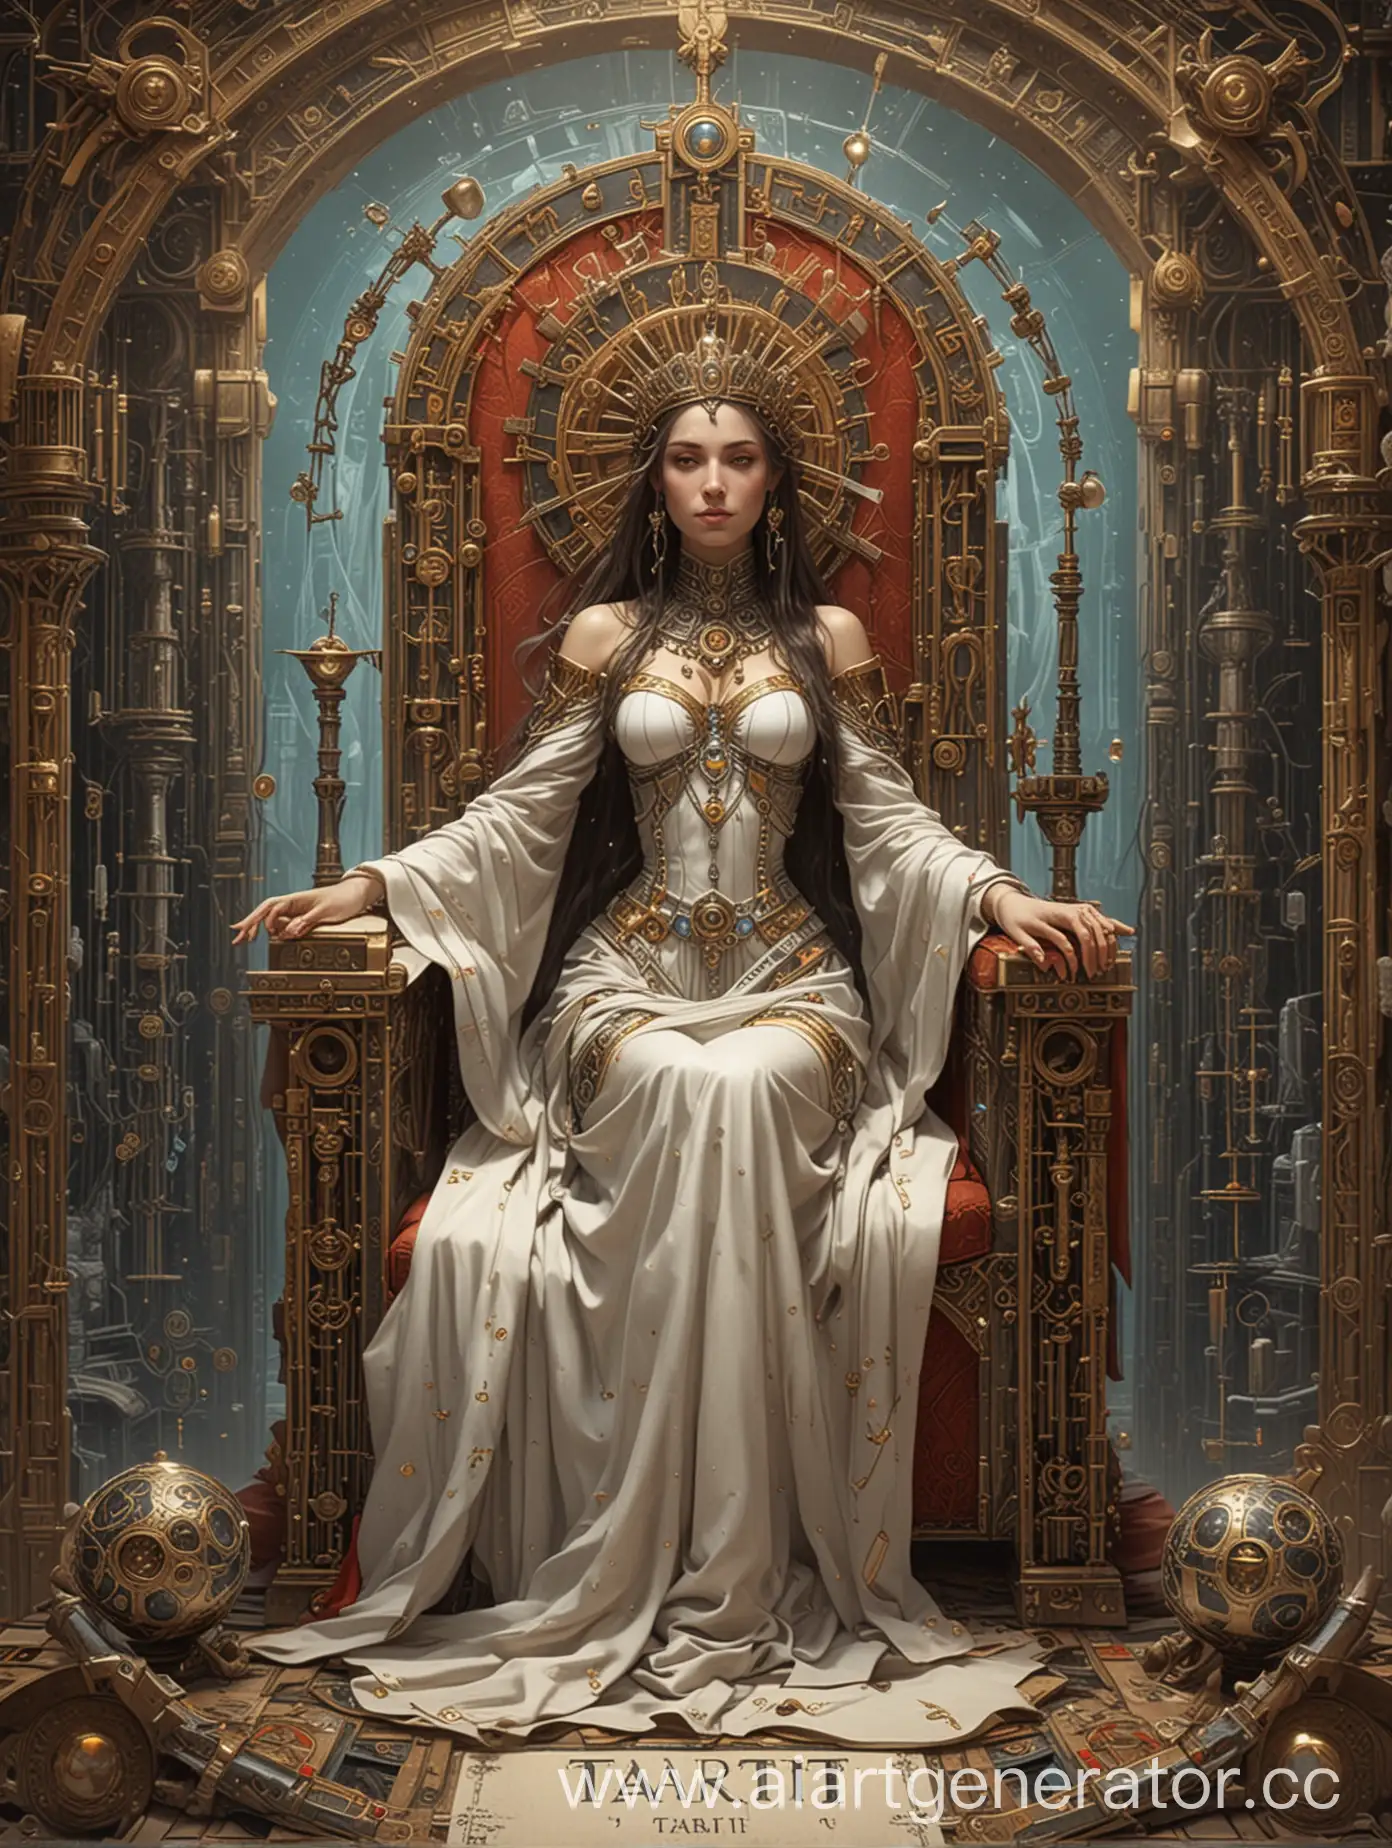 tarot: futuristic ai with maximum detail with elements of sexuality, magic - Arcanum Priestess: sitting on a throne; on the sides to the left and right of the Priestess are the letters J and B; a large open book lies on her lap